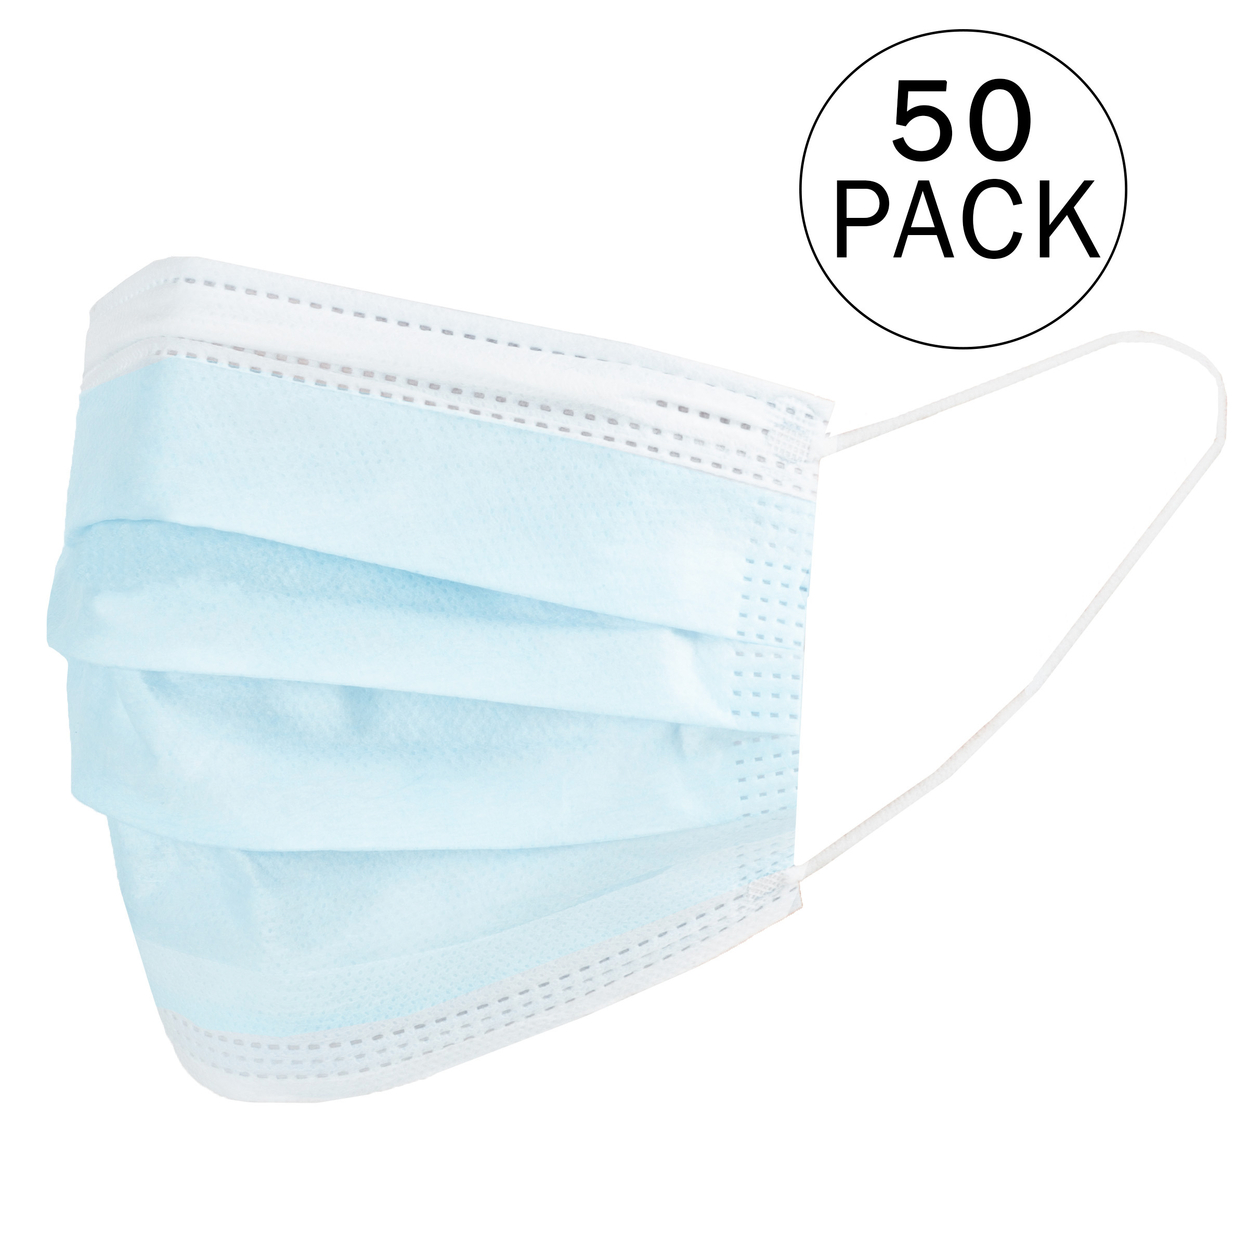 50 Pack Disposable 3-Ply Face Mask With Ear Loops For Kids